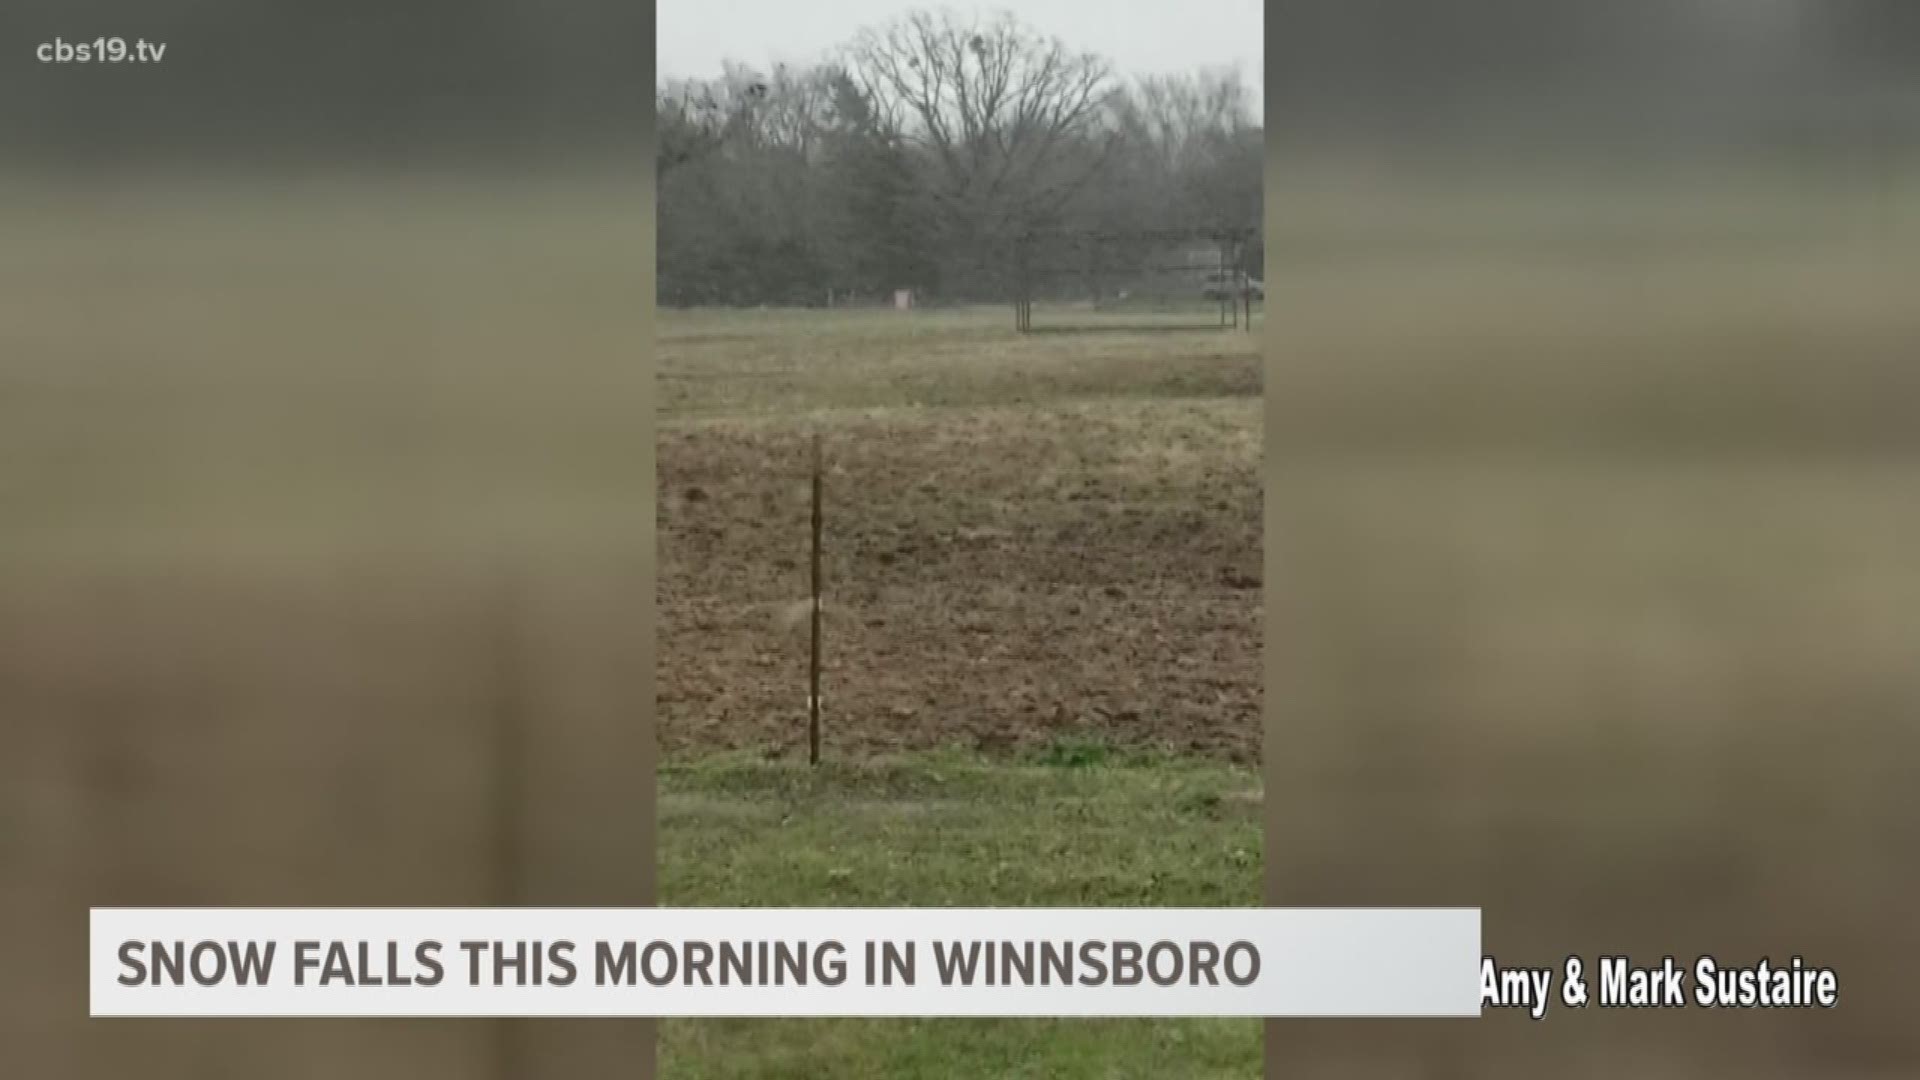 Mark and Amy Sustaire recorded snow flurries in Winnsboro at 8 a.m., Sat. Jan 19, 2019